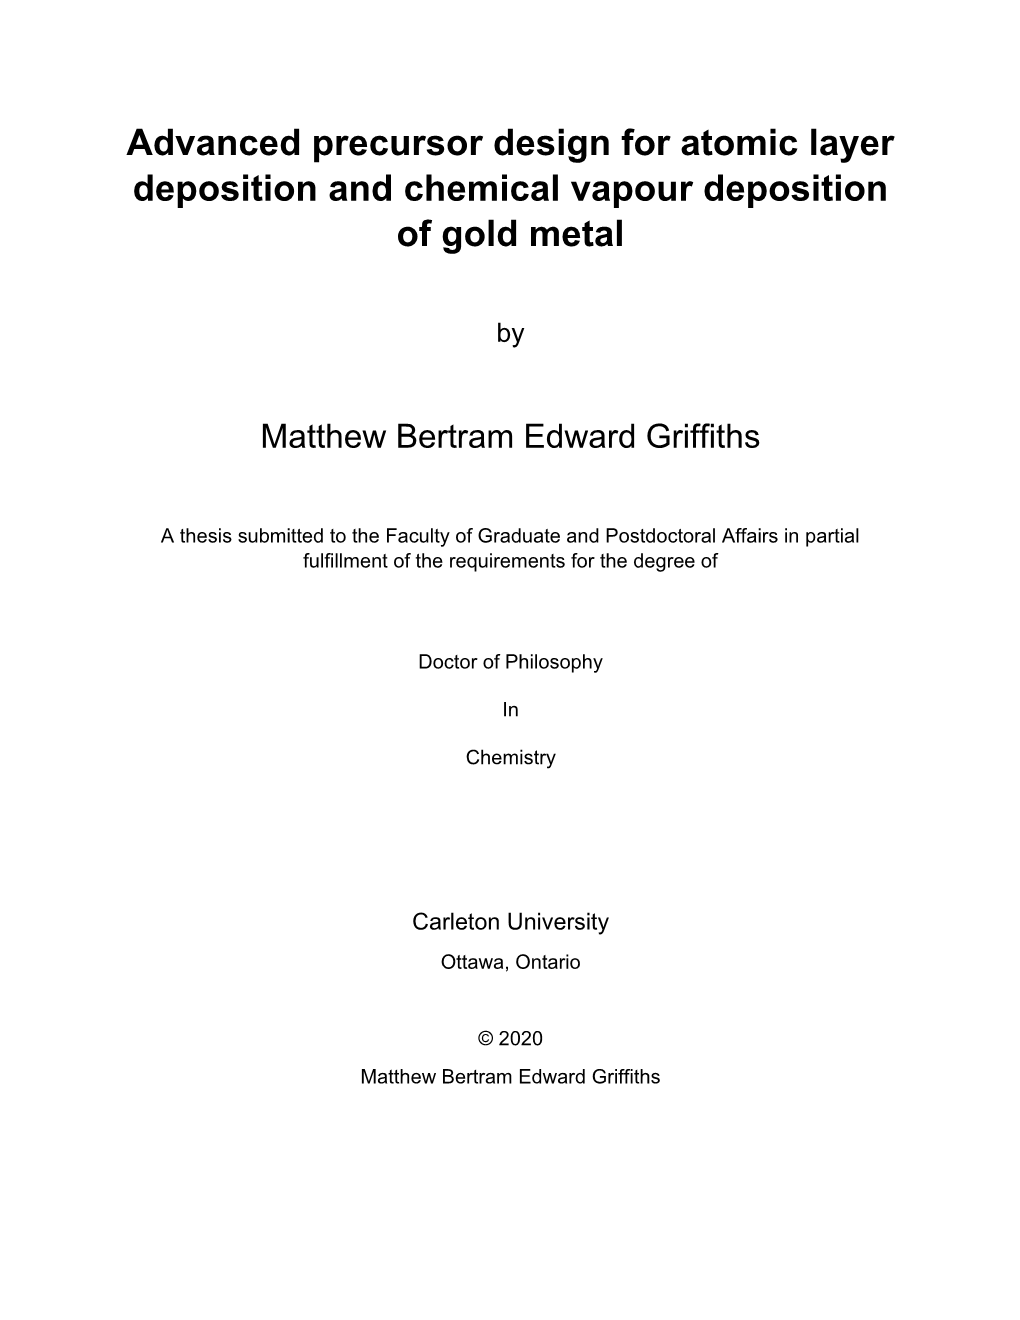 Advanced Precursor Design for Atomic Layer Deposition and Chemical Vapour Deposition of Gold Metal